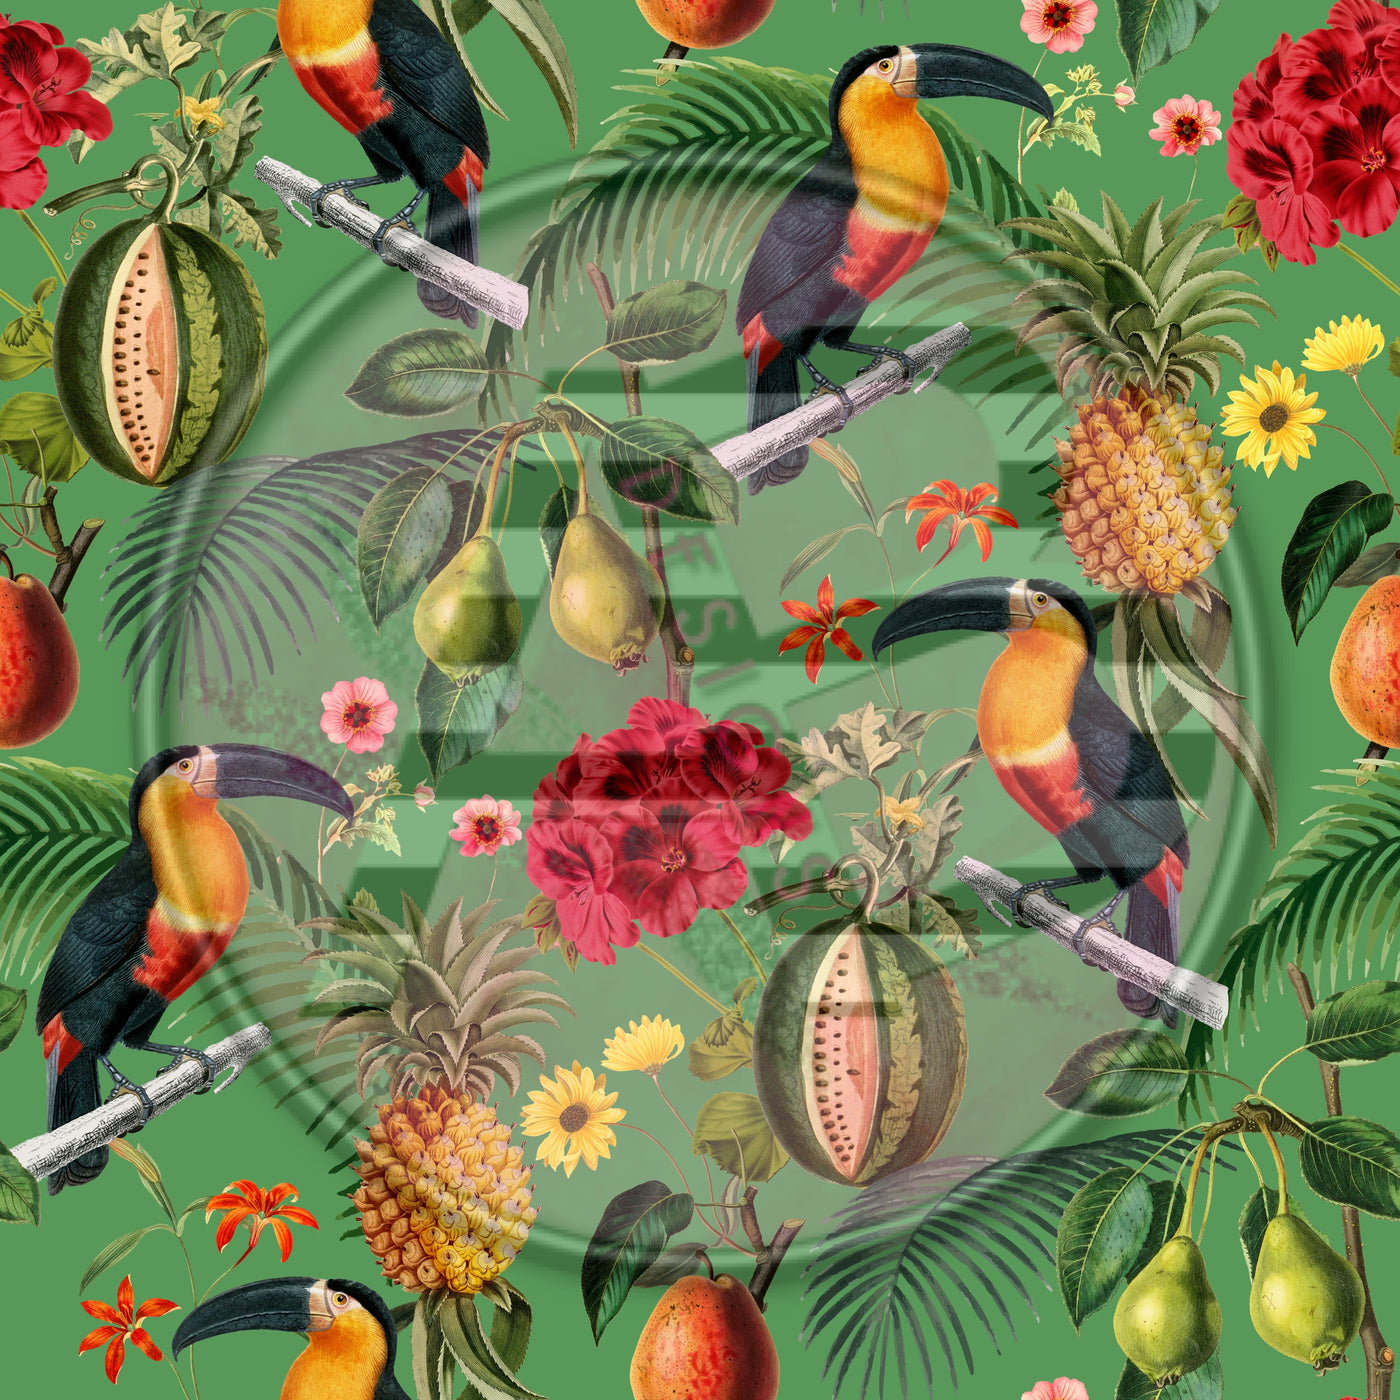 Adhesive Patterned Vinyl - Tropical 1759